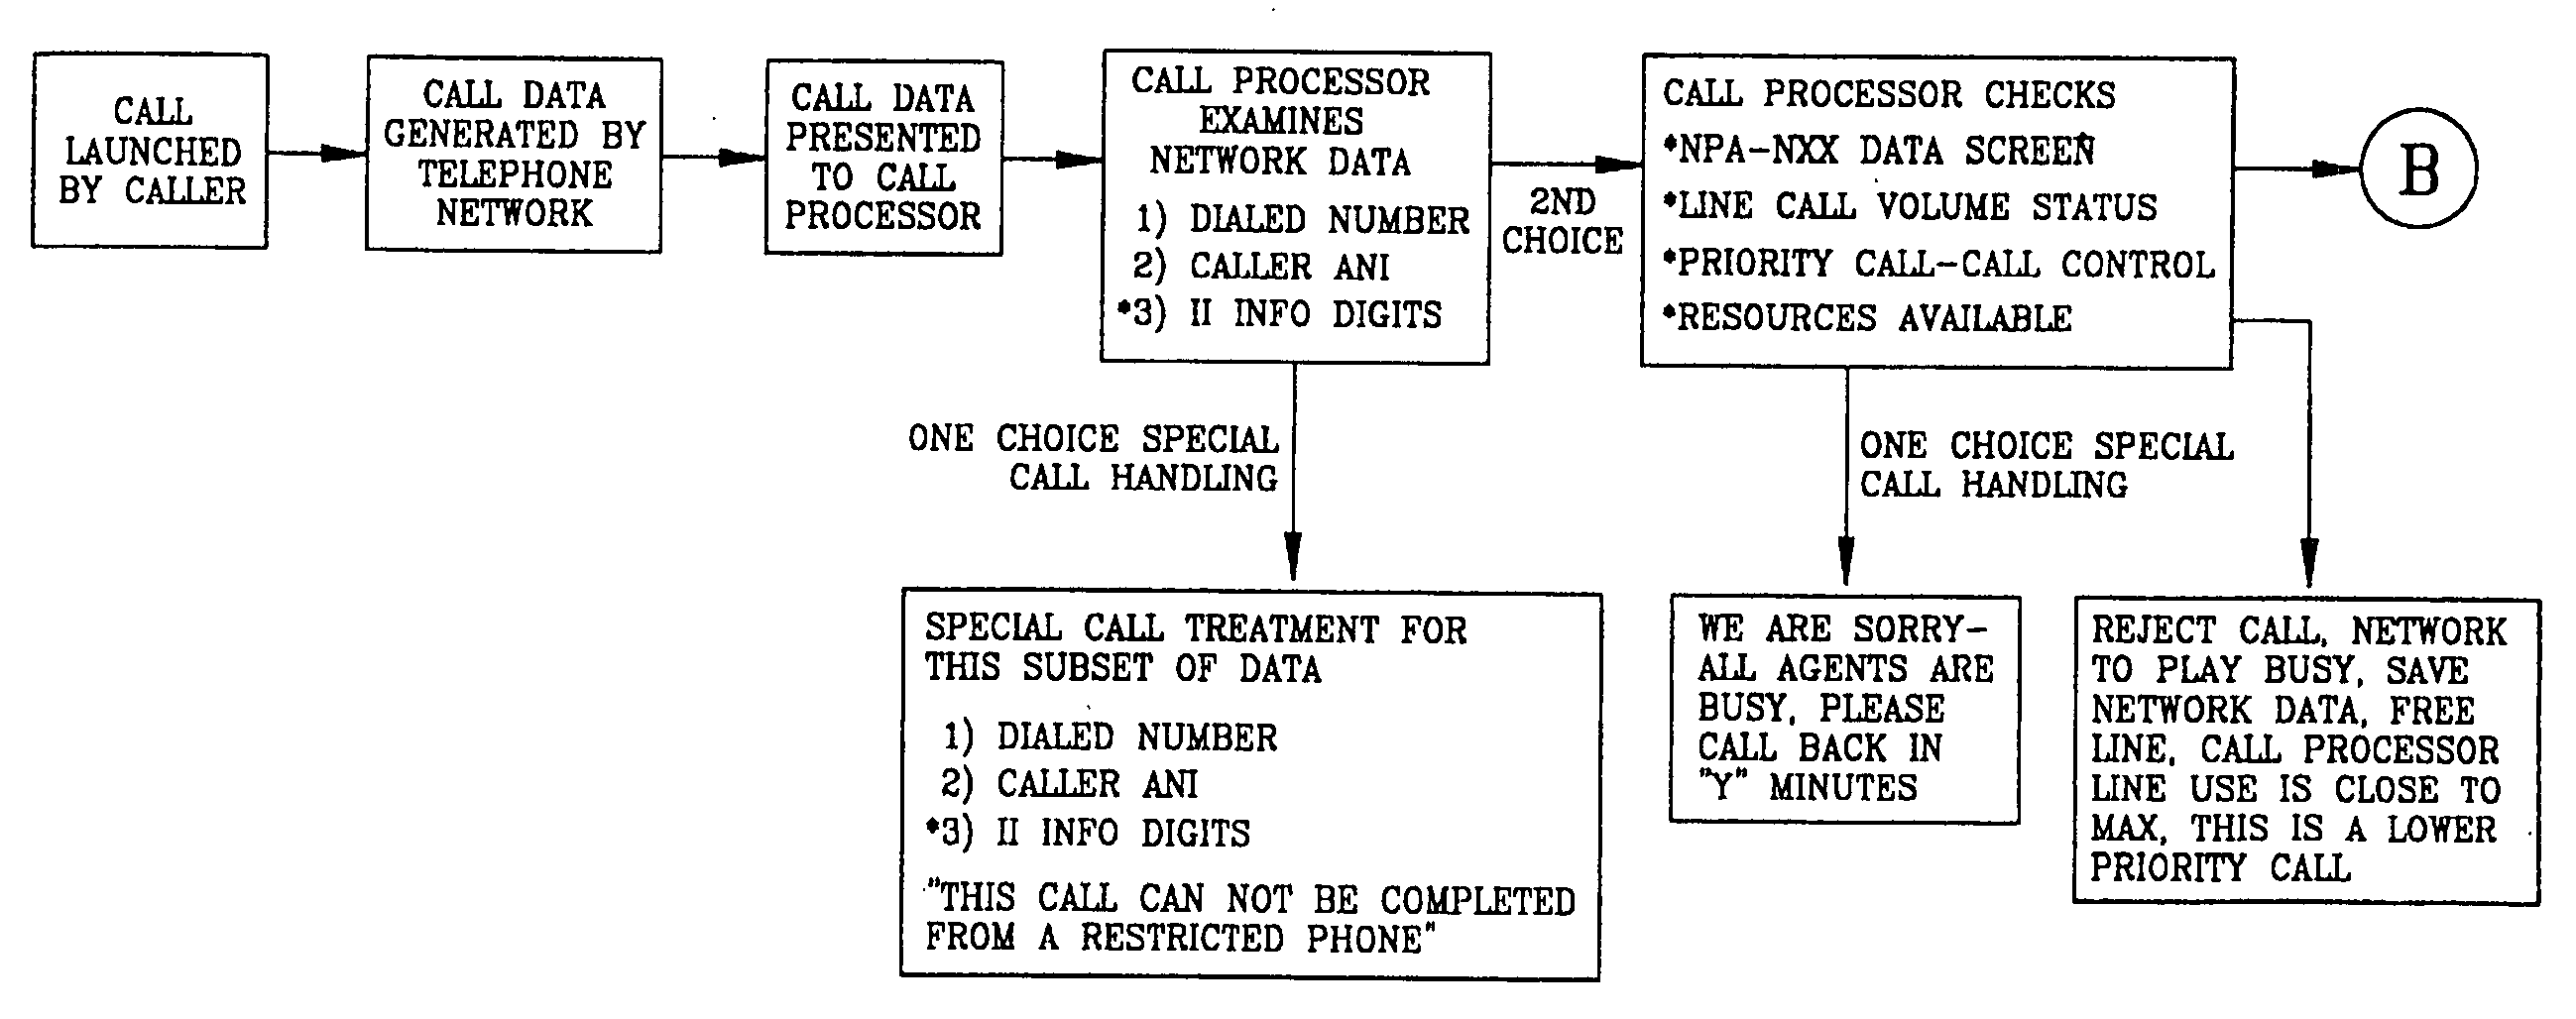 Call processing system with call screening